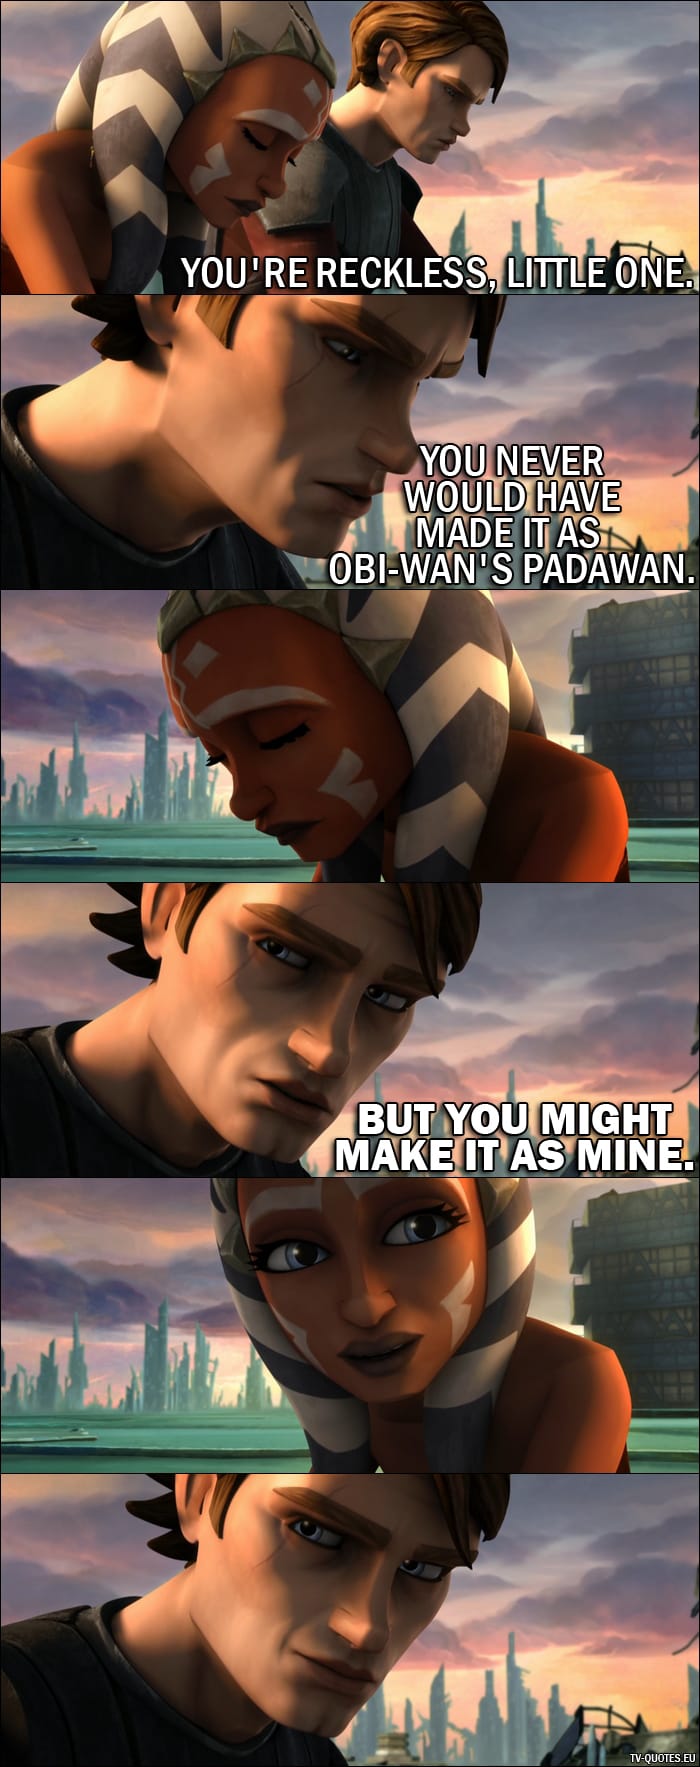 From Star Wars: The Clone Wars (2008) movie - Anakin Skywalker (to Ahsoka): You’re reckless, little one. You never would have made it as Obi-Wan’s Padawan. But you might make it as mine.